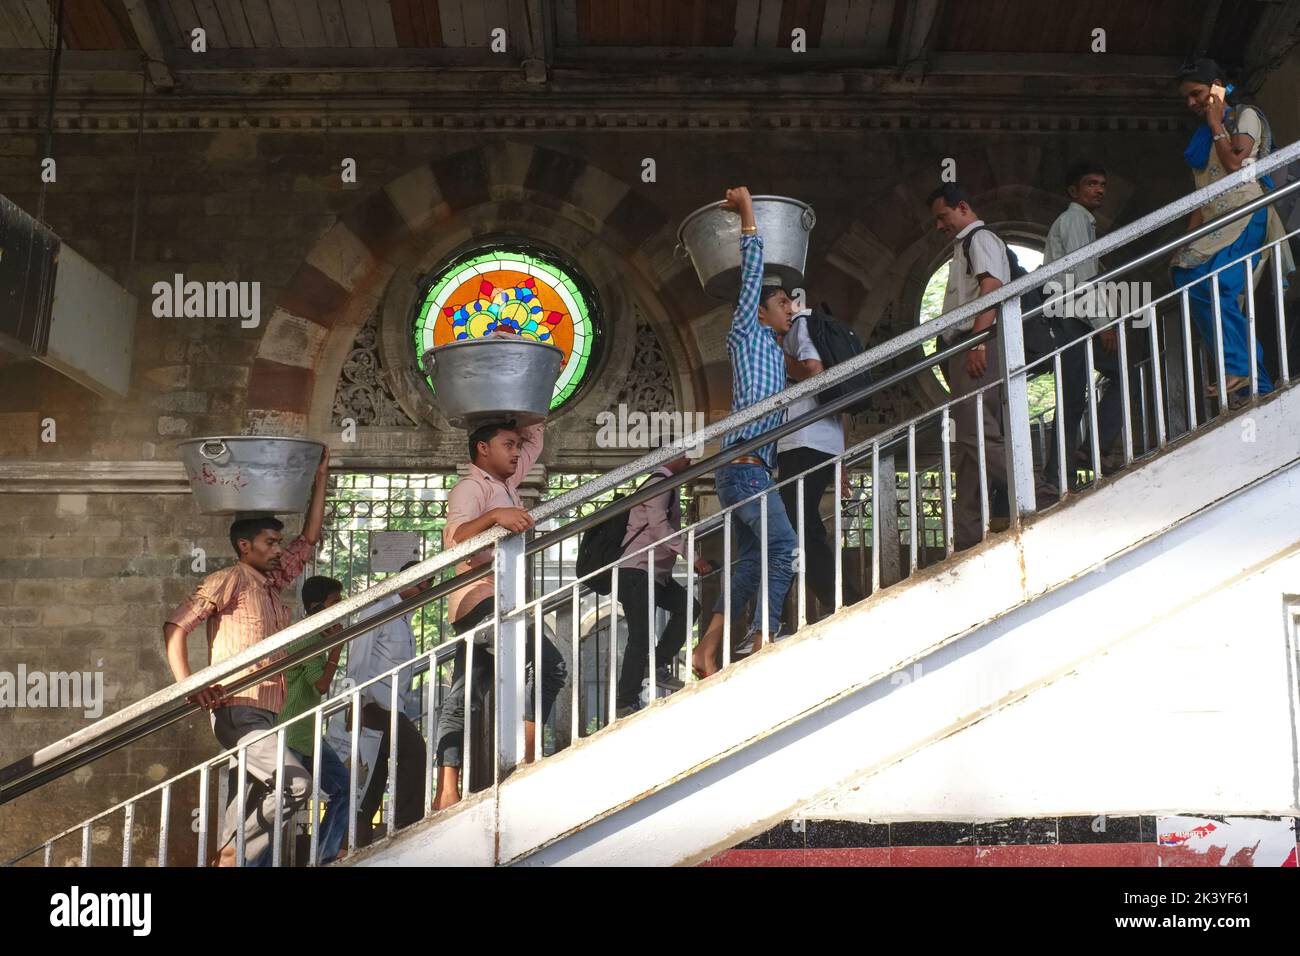 Indian men carrying goods on their heads, ascending a staircase at Chhatrapati Shivaji Maharaj Terminus in Mumbai, India Stock Photo